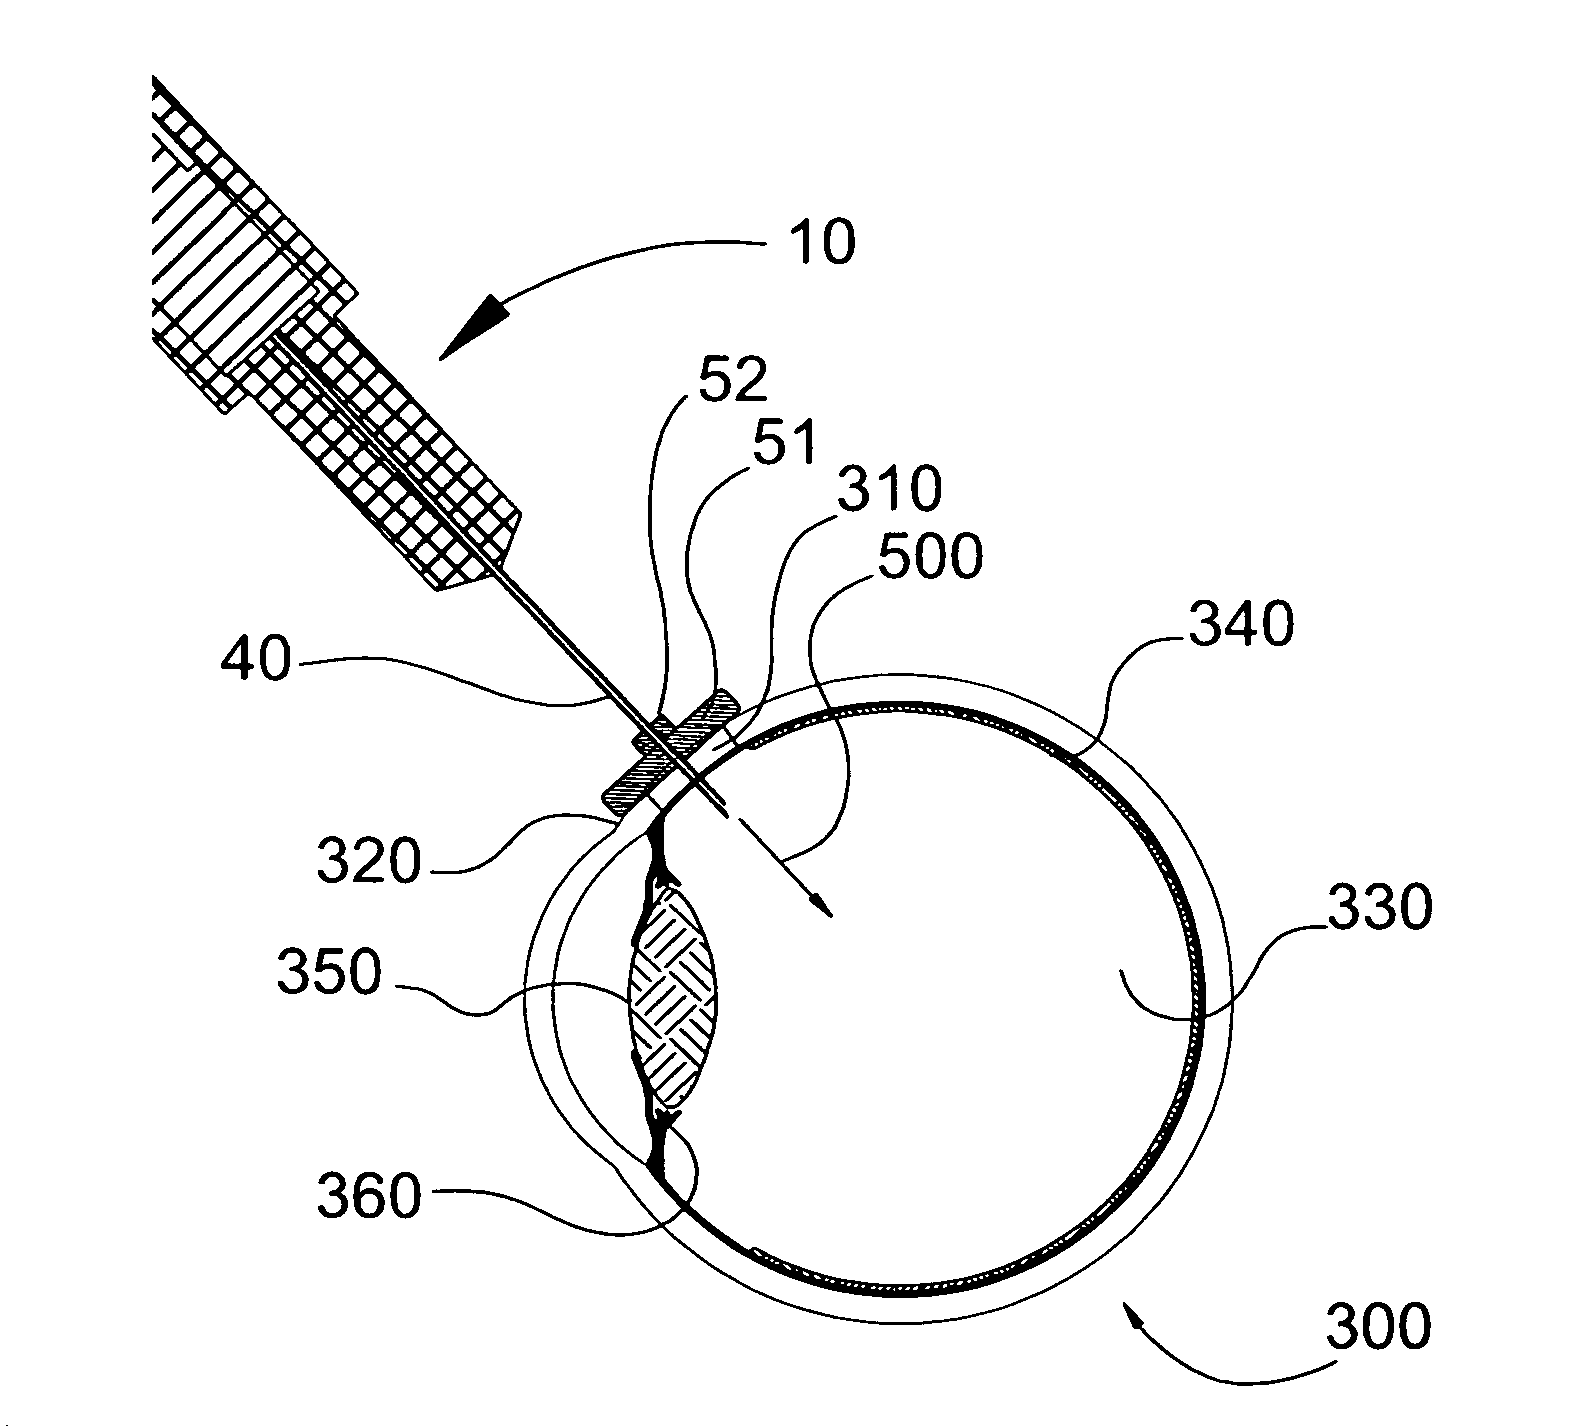 Intravitreal injection device and system